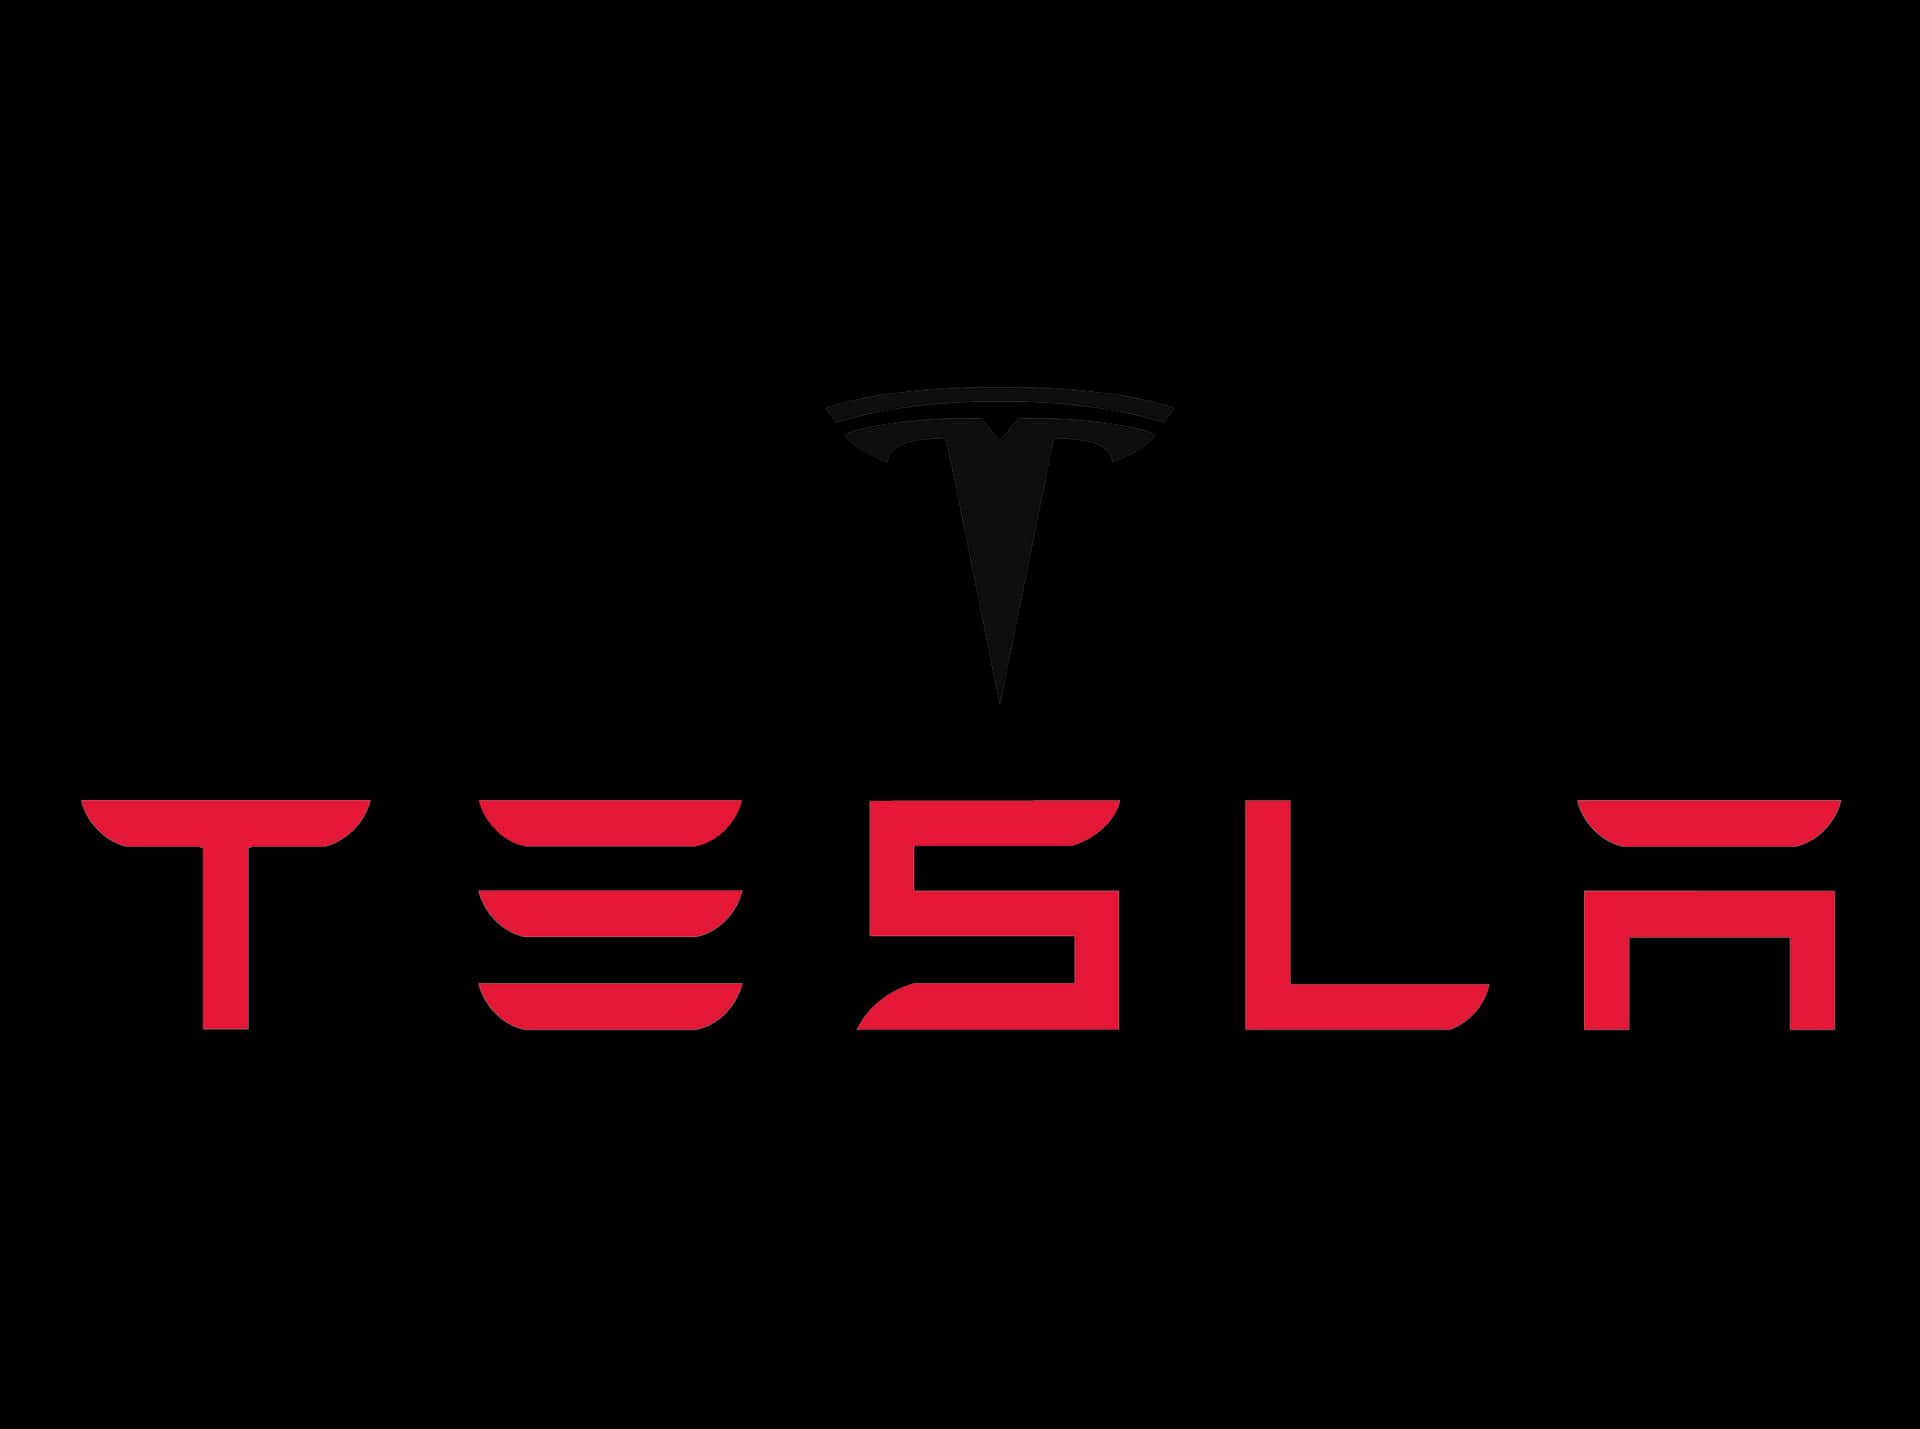 Red and silver Tesla logo standing out against a black background Wallpaper